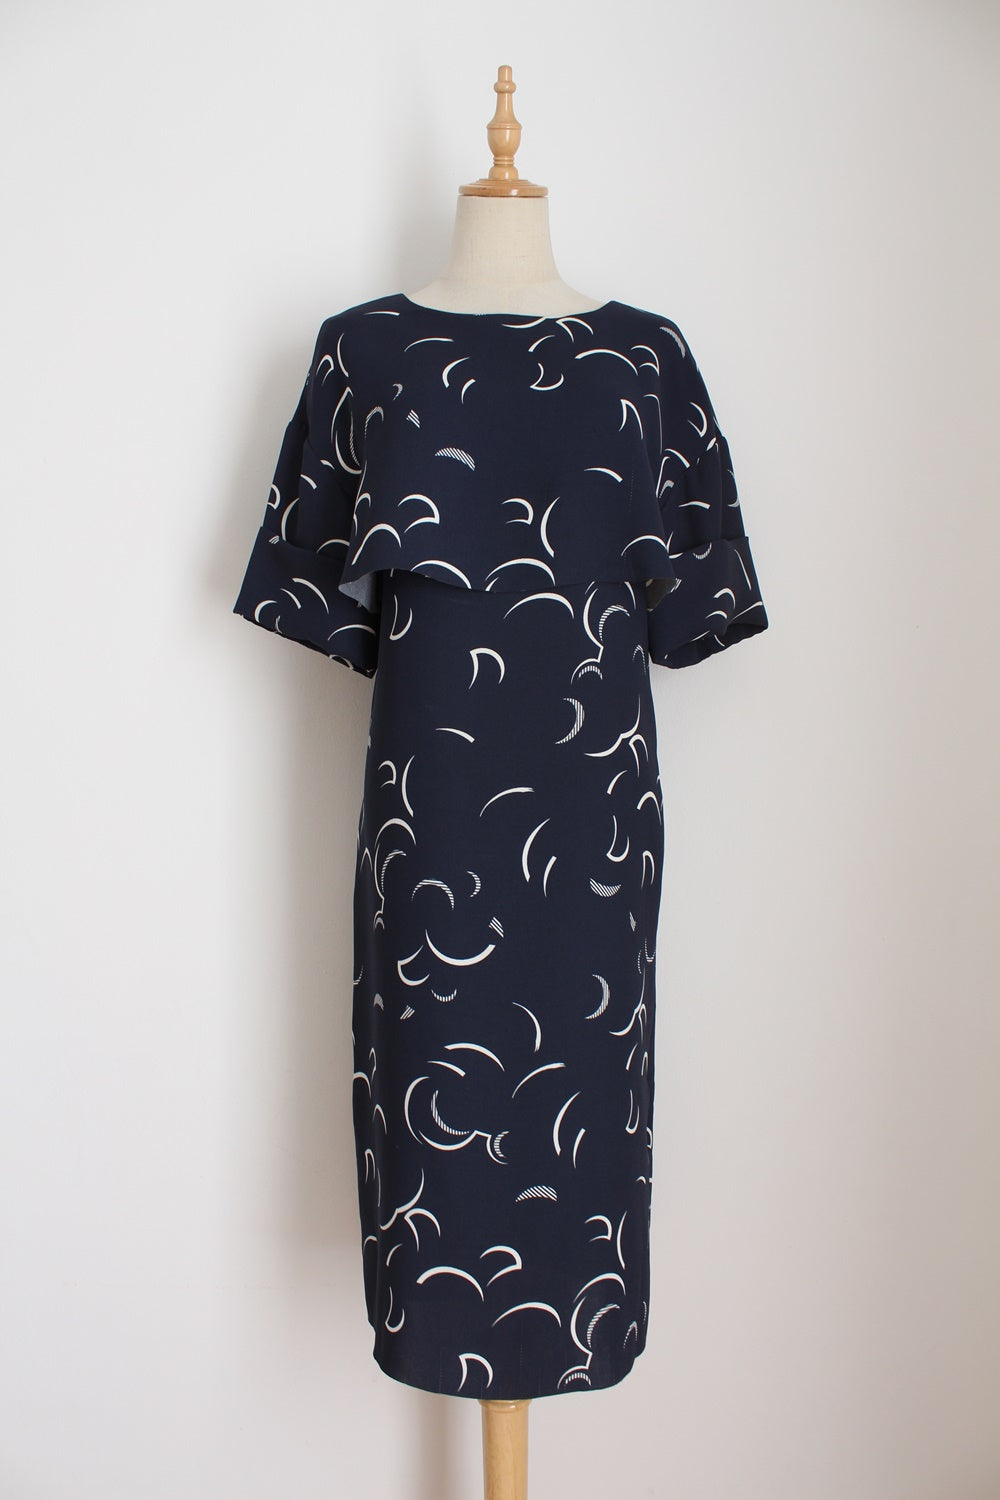 & OTHER STORIES PRINTED DRESS BLUE WHITE - SIZE 8